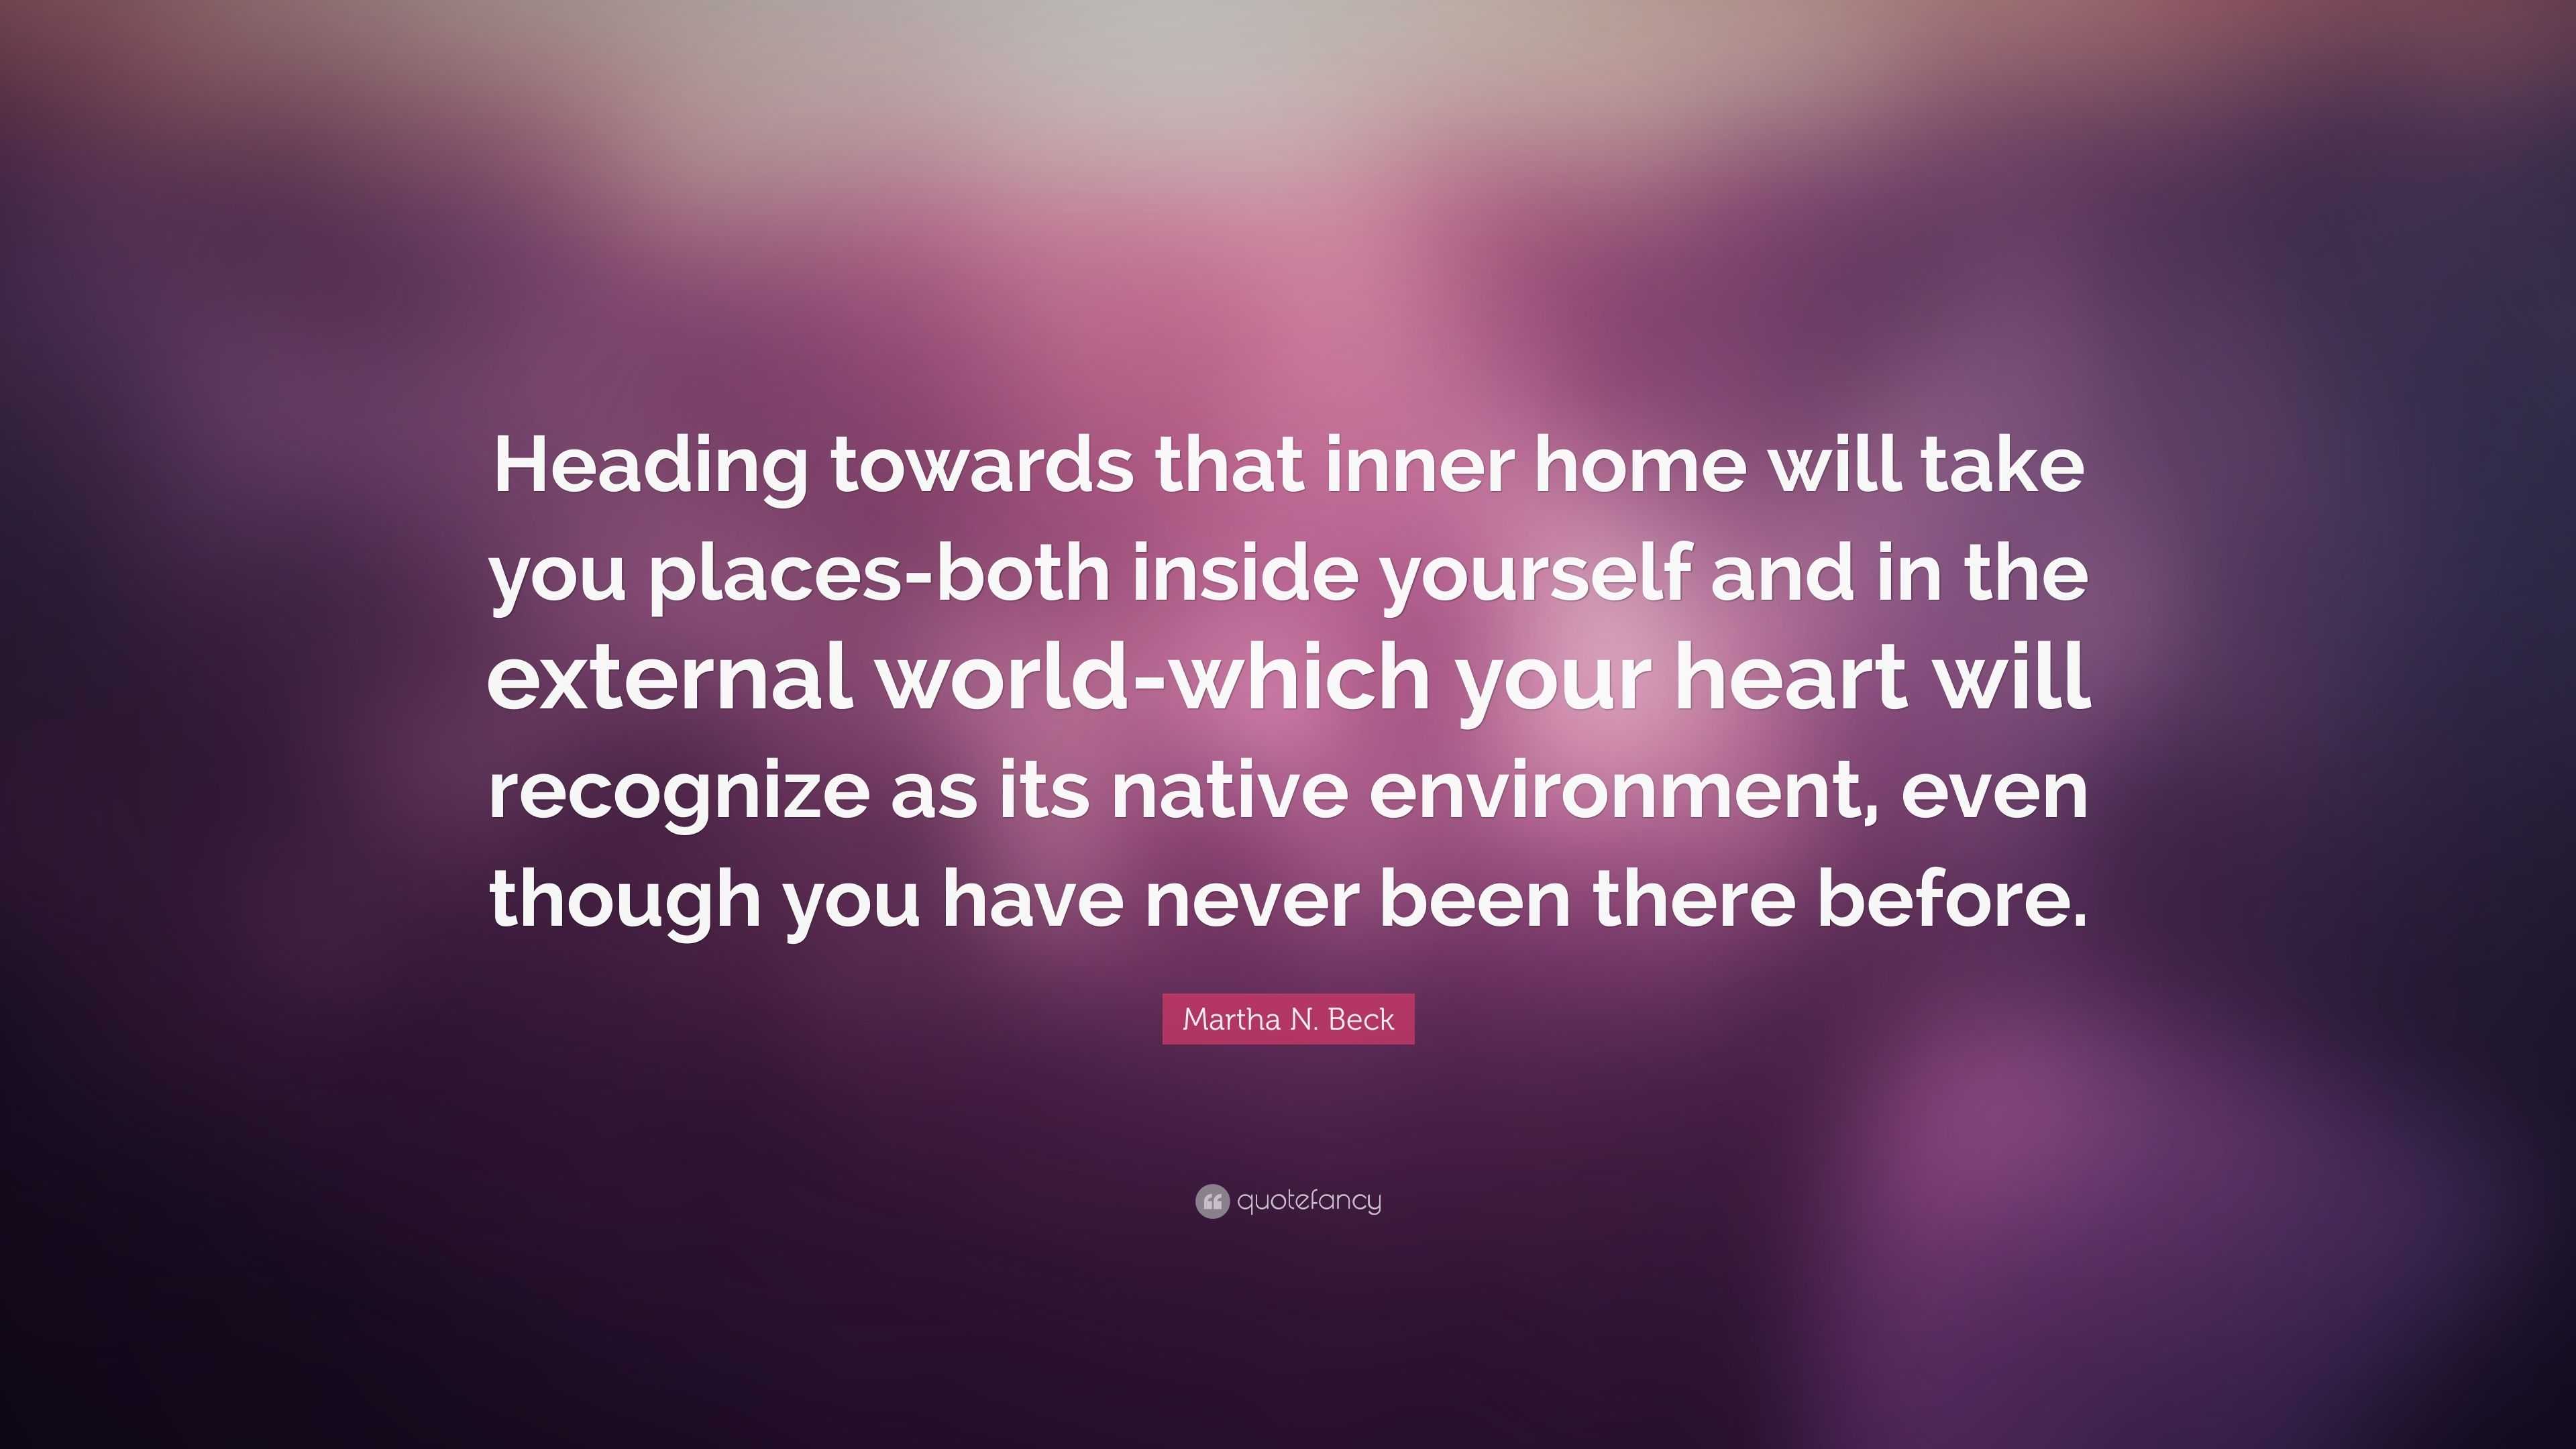 Turn your world inside out: The relationship between inner (Nei